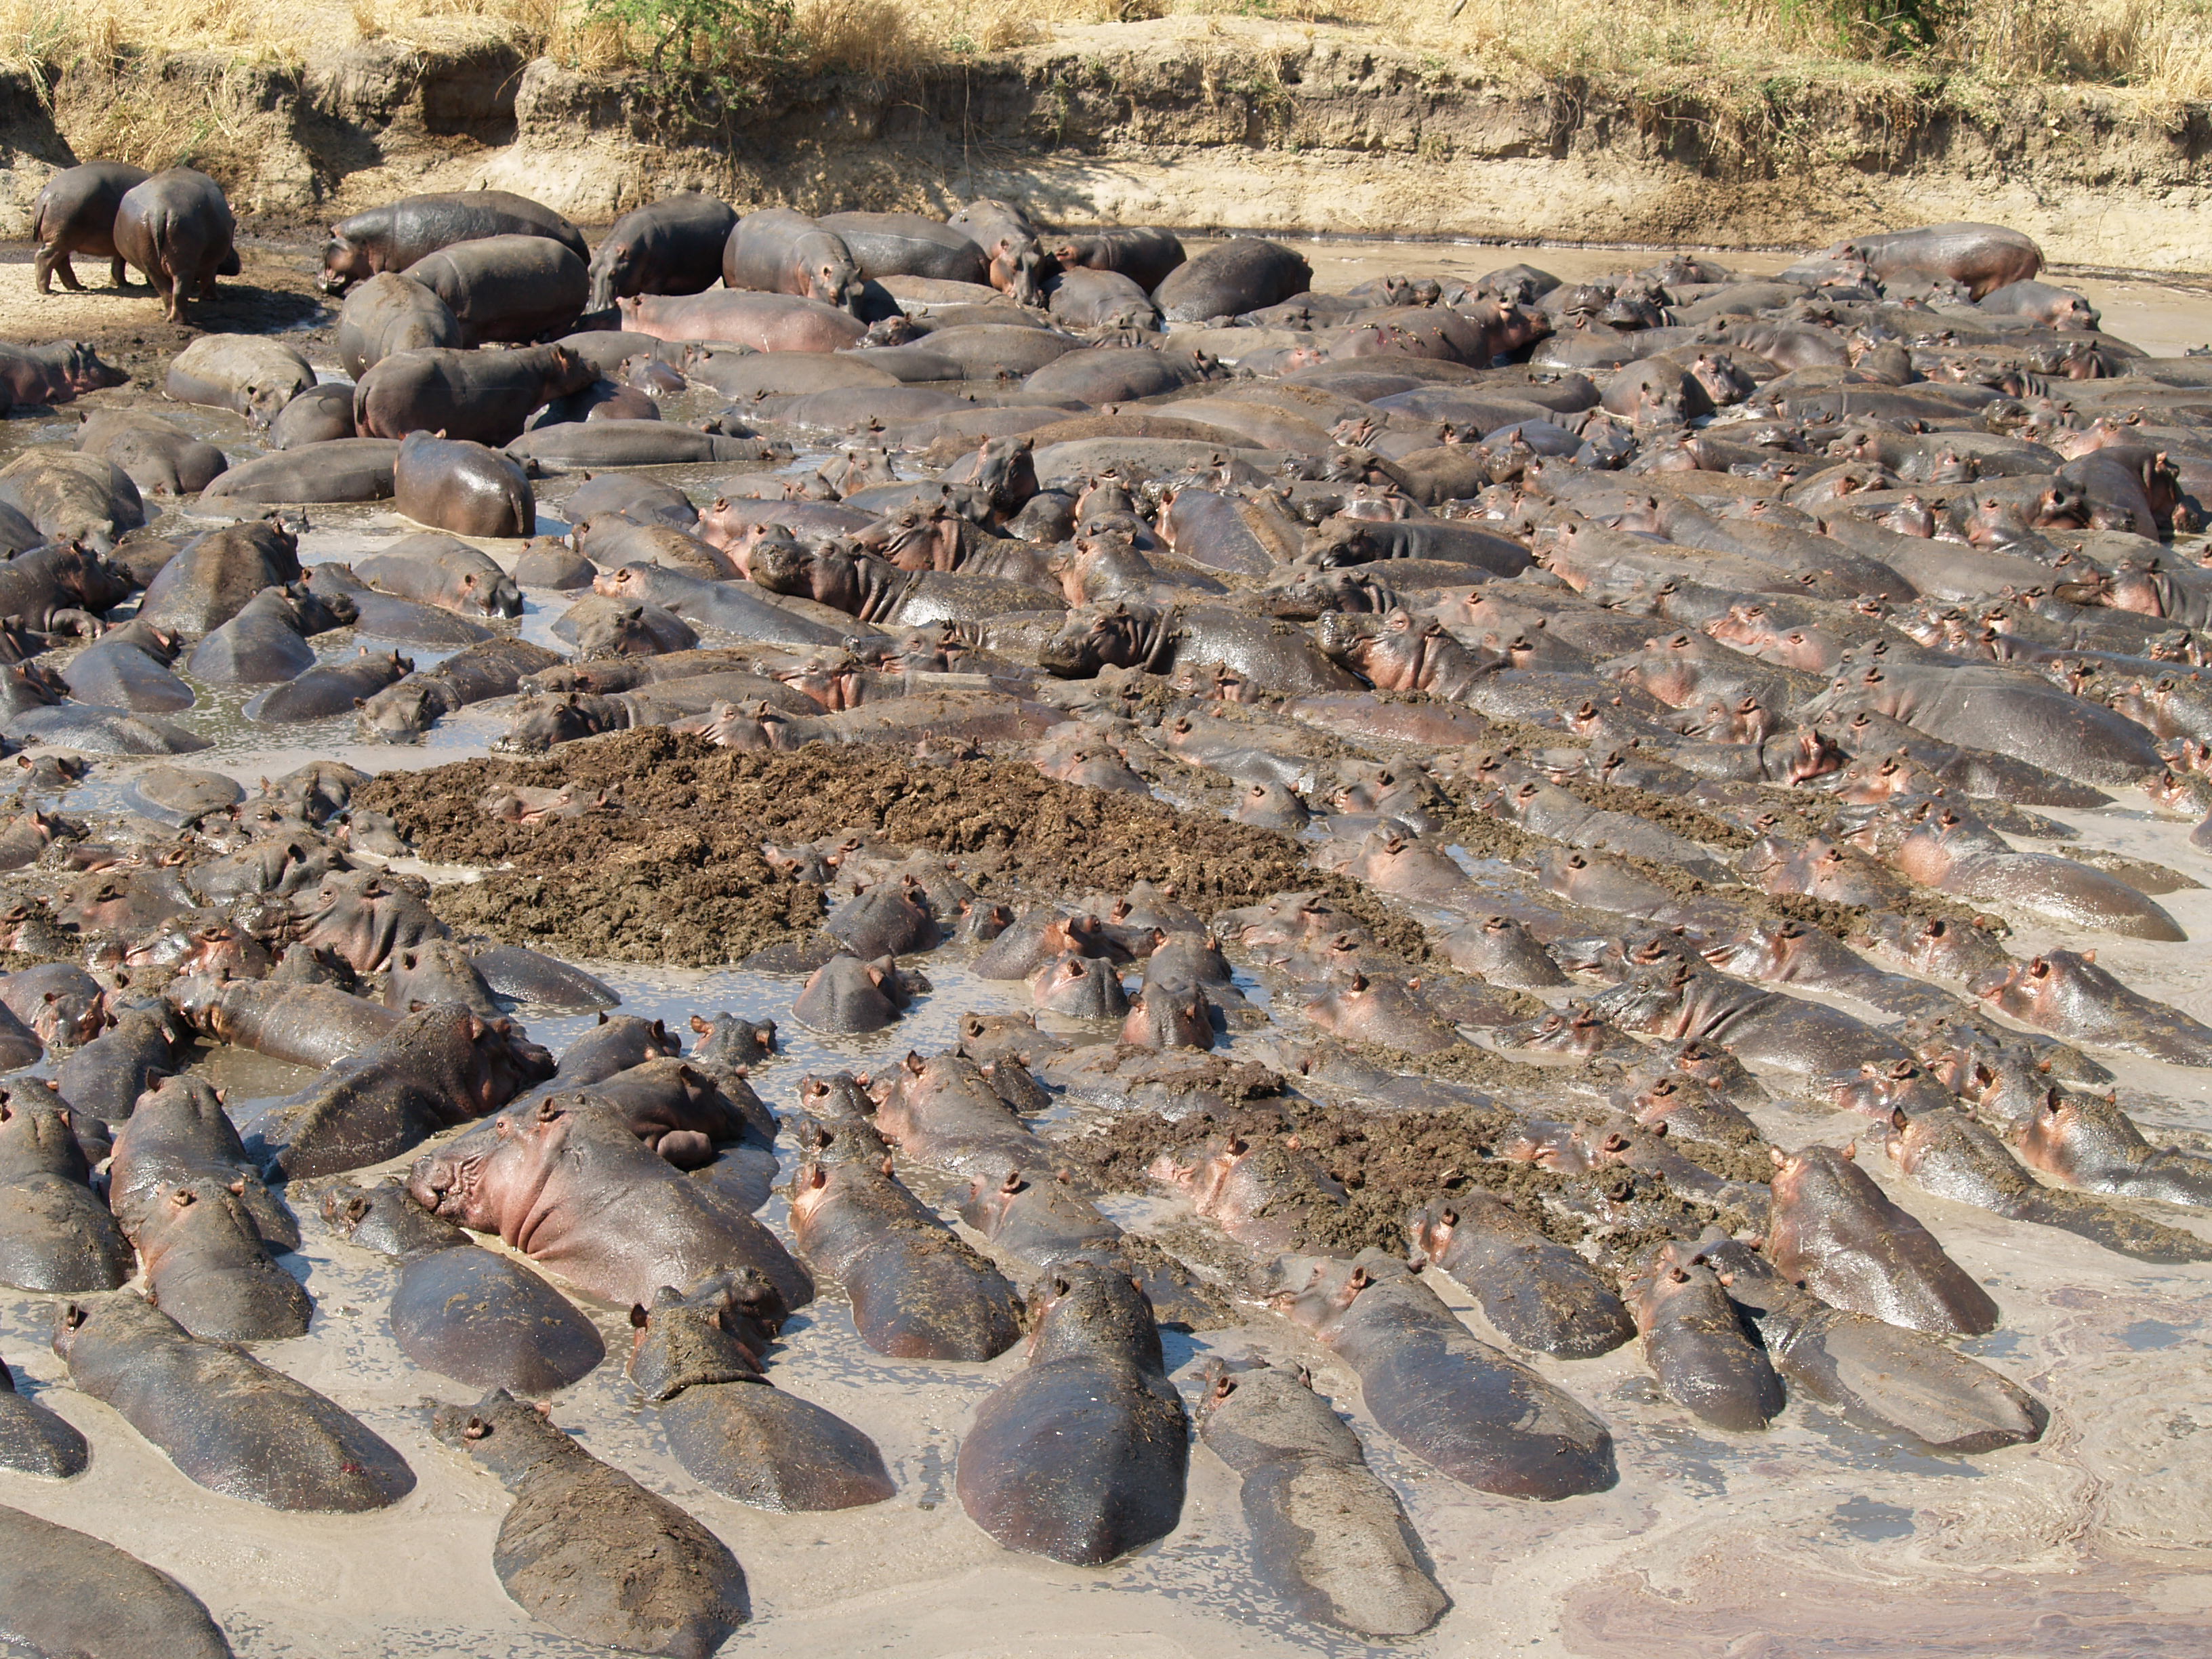 High concentration of hippos in October in Katavi National Park